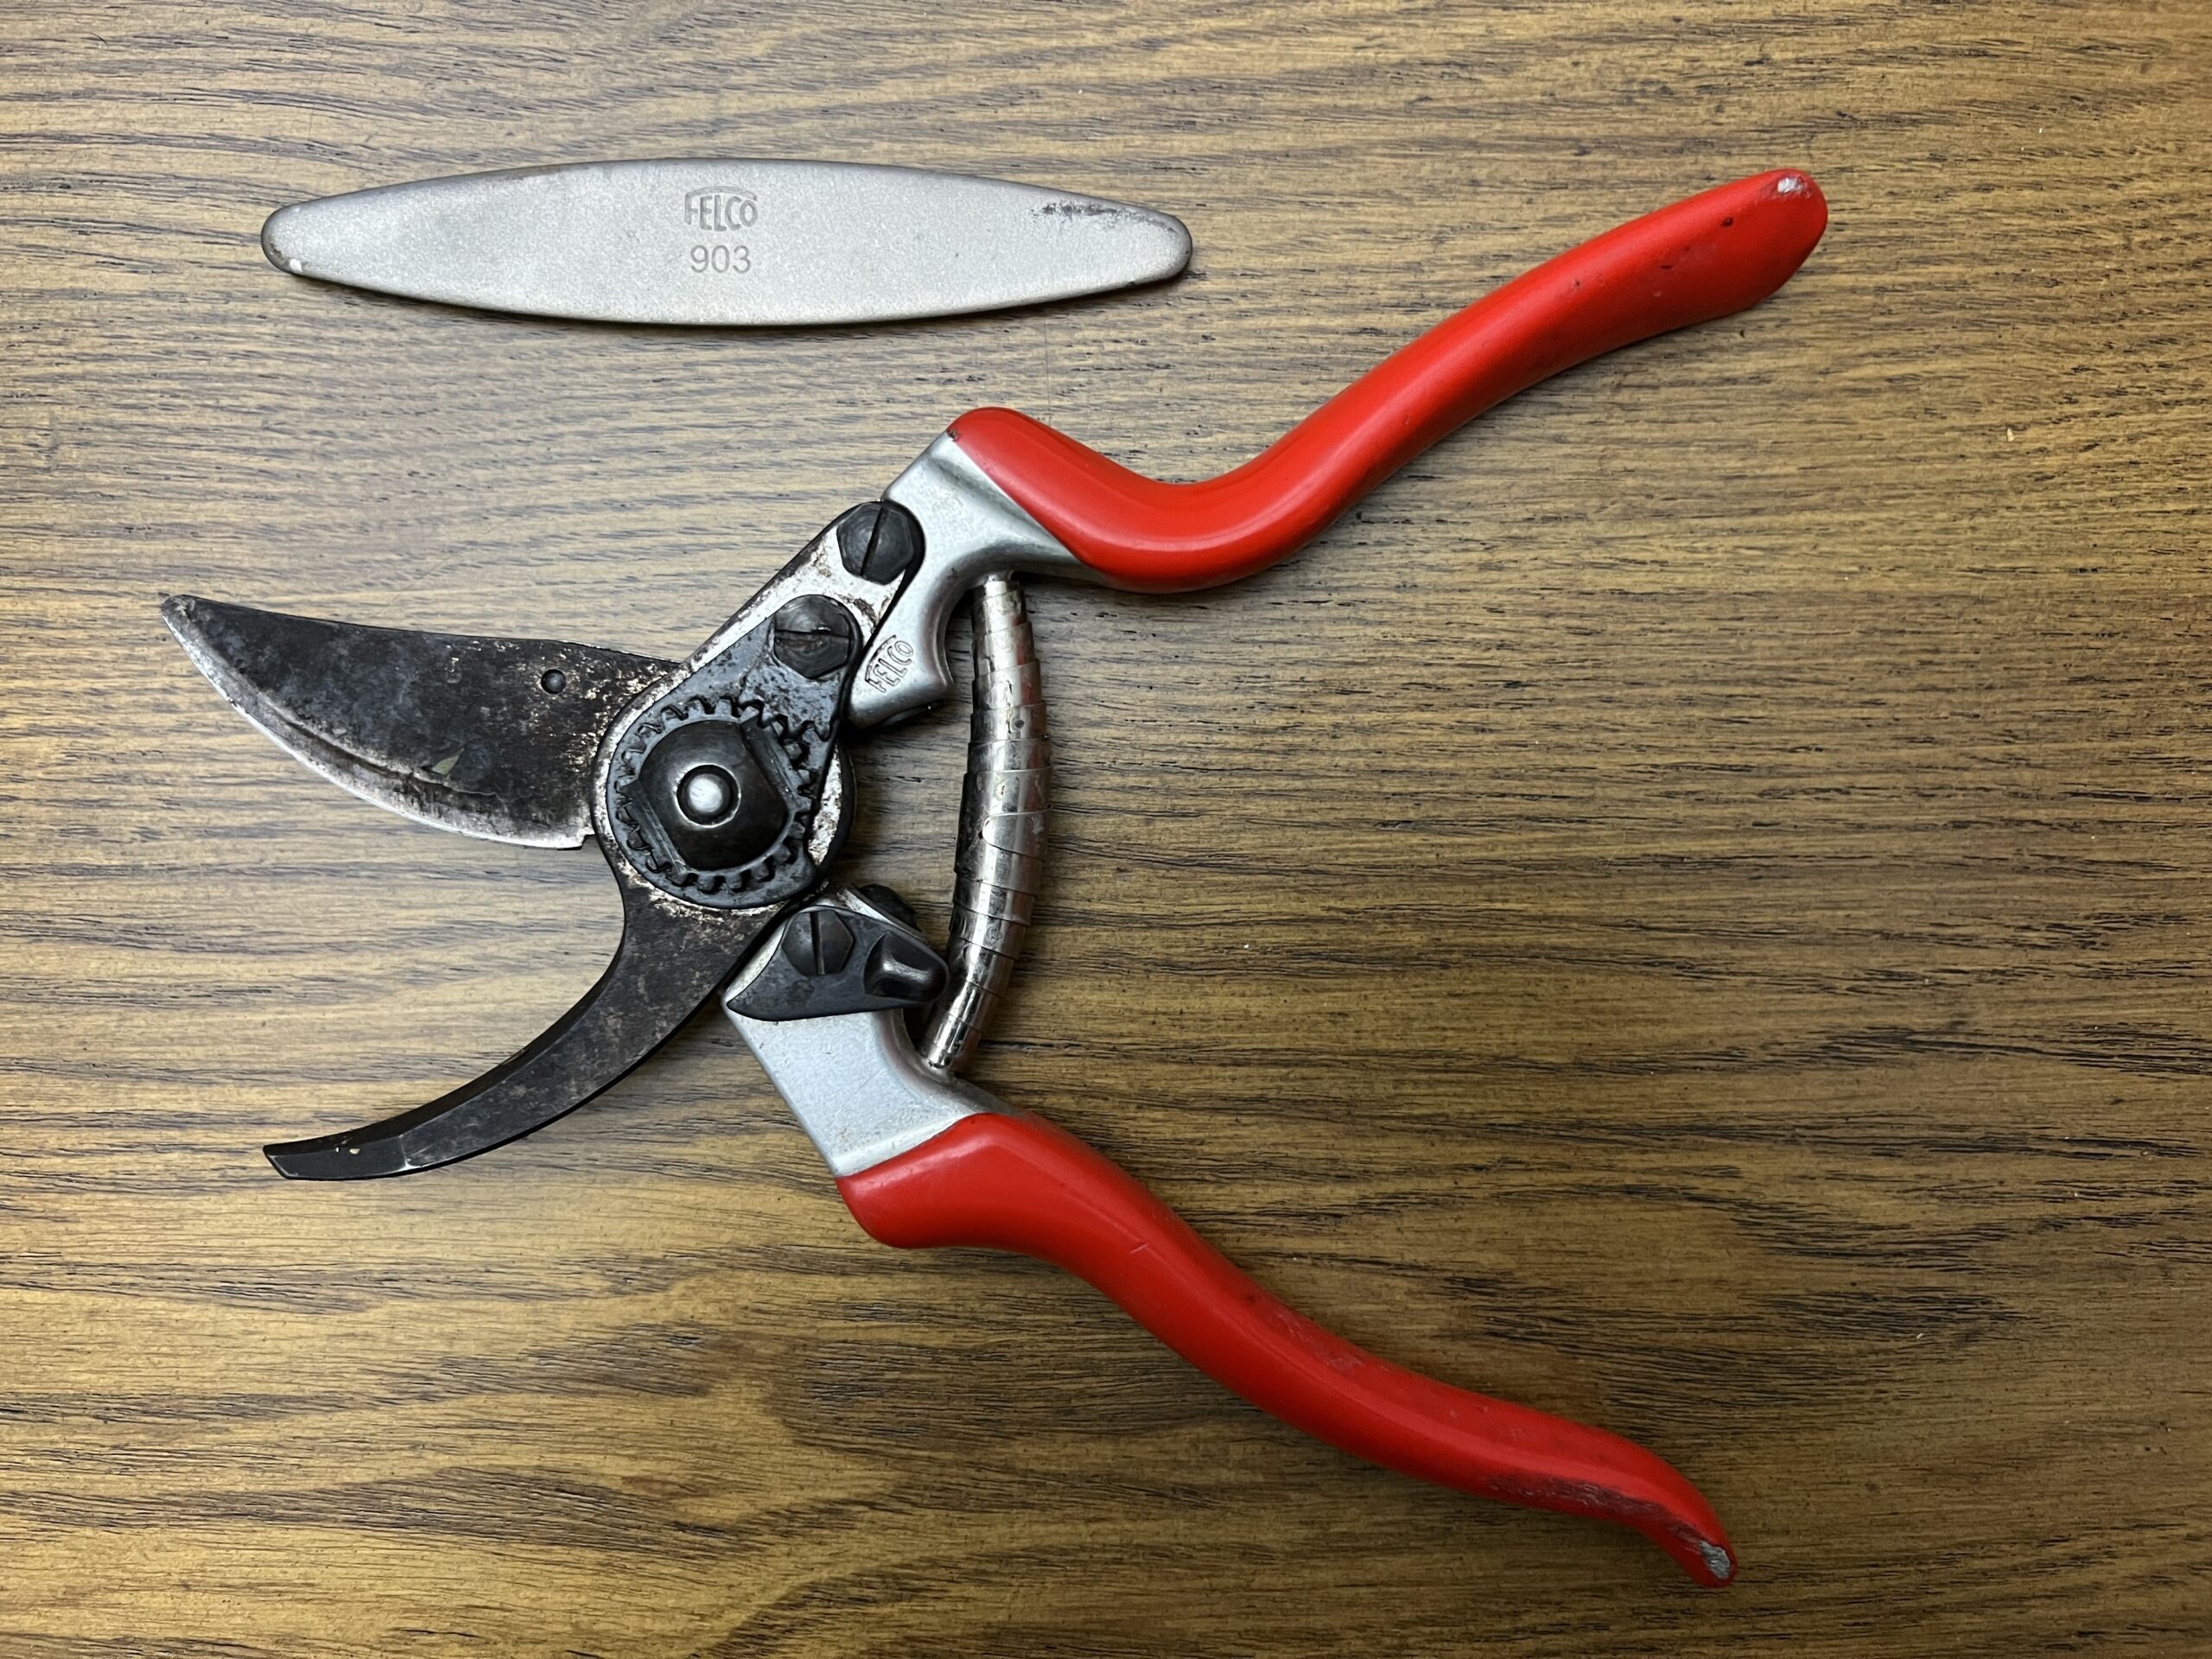 Pruners like this well-used Felco #2 should be sharpened before every use for clean cuts.  Above the pruner is a Felco #903 sharpening tool. Neither is inexpensive but used together the pruner will last for years.